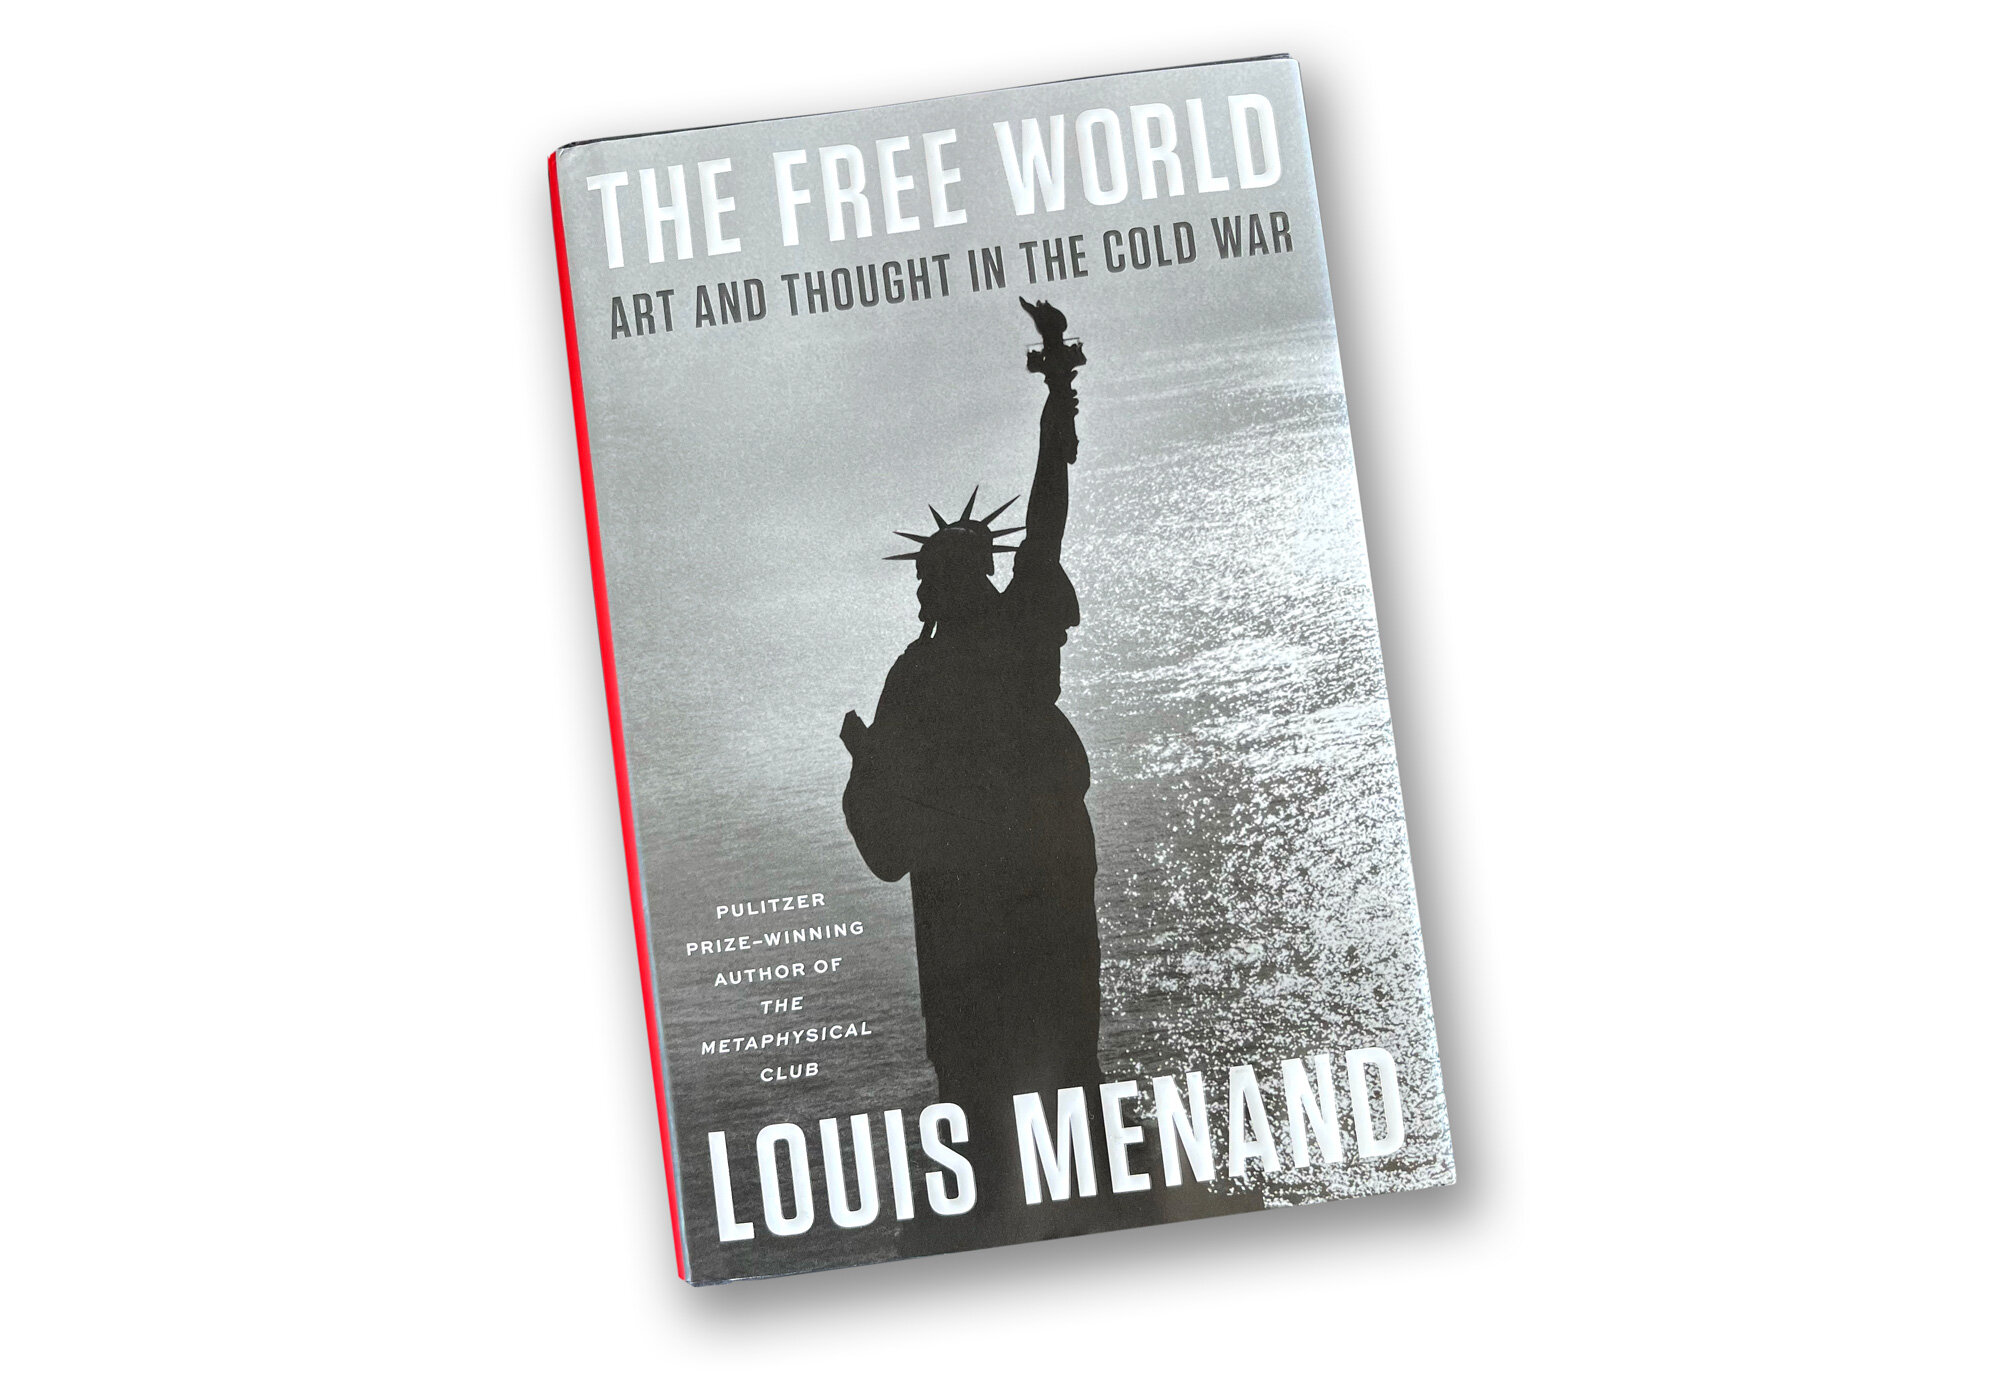 The Metaphysical Club' by Louis Menand